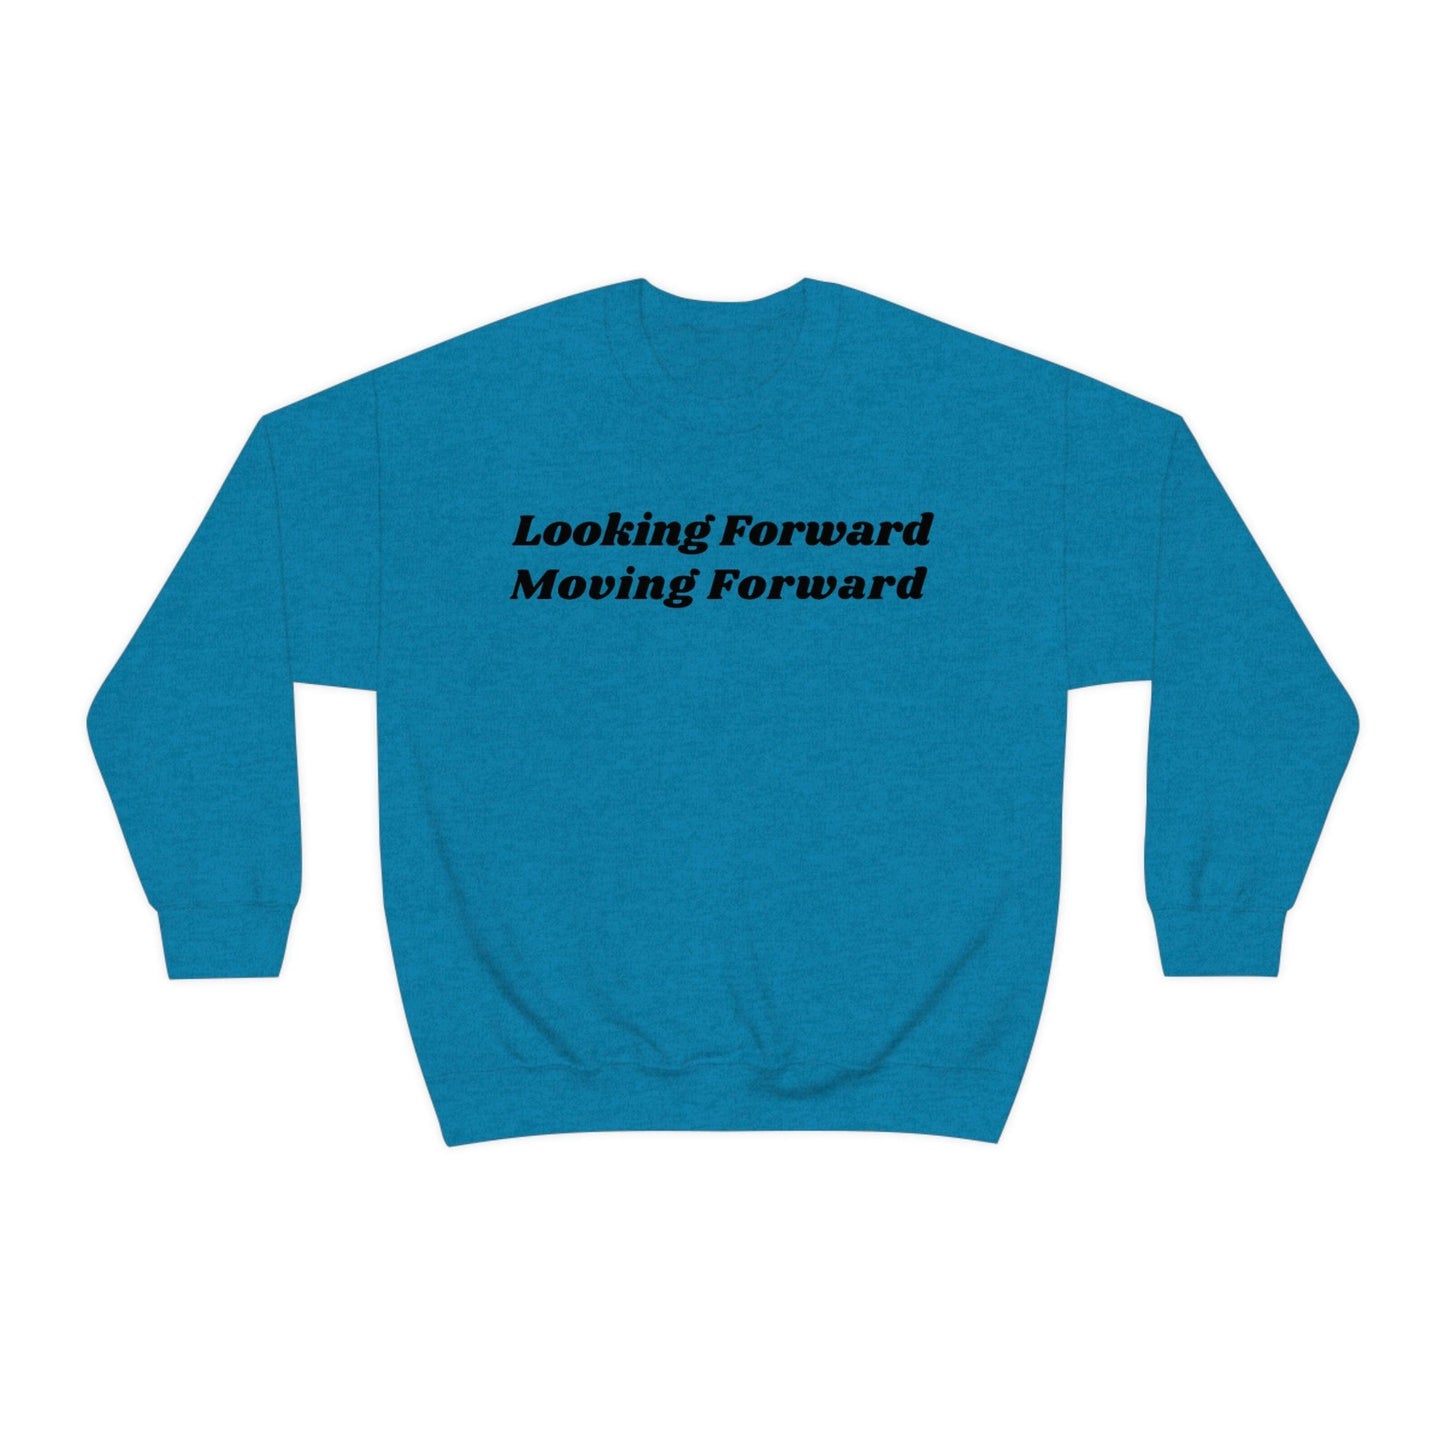 Moving forward from domestic violence, stop domestic violence, moving forward with my life, empowerment, inspirational sweatshirt 